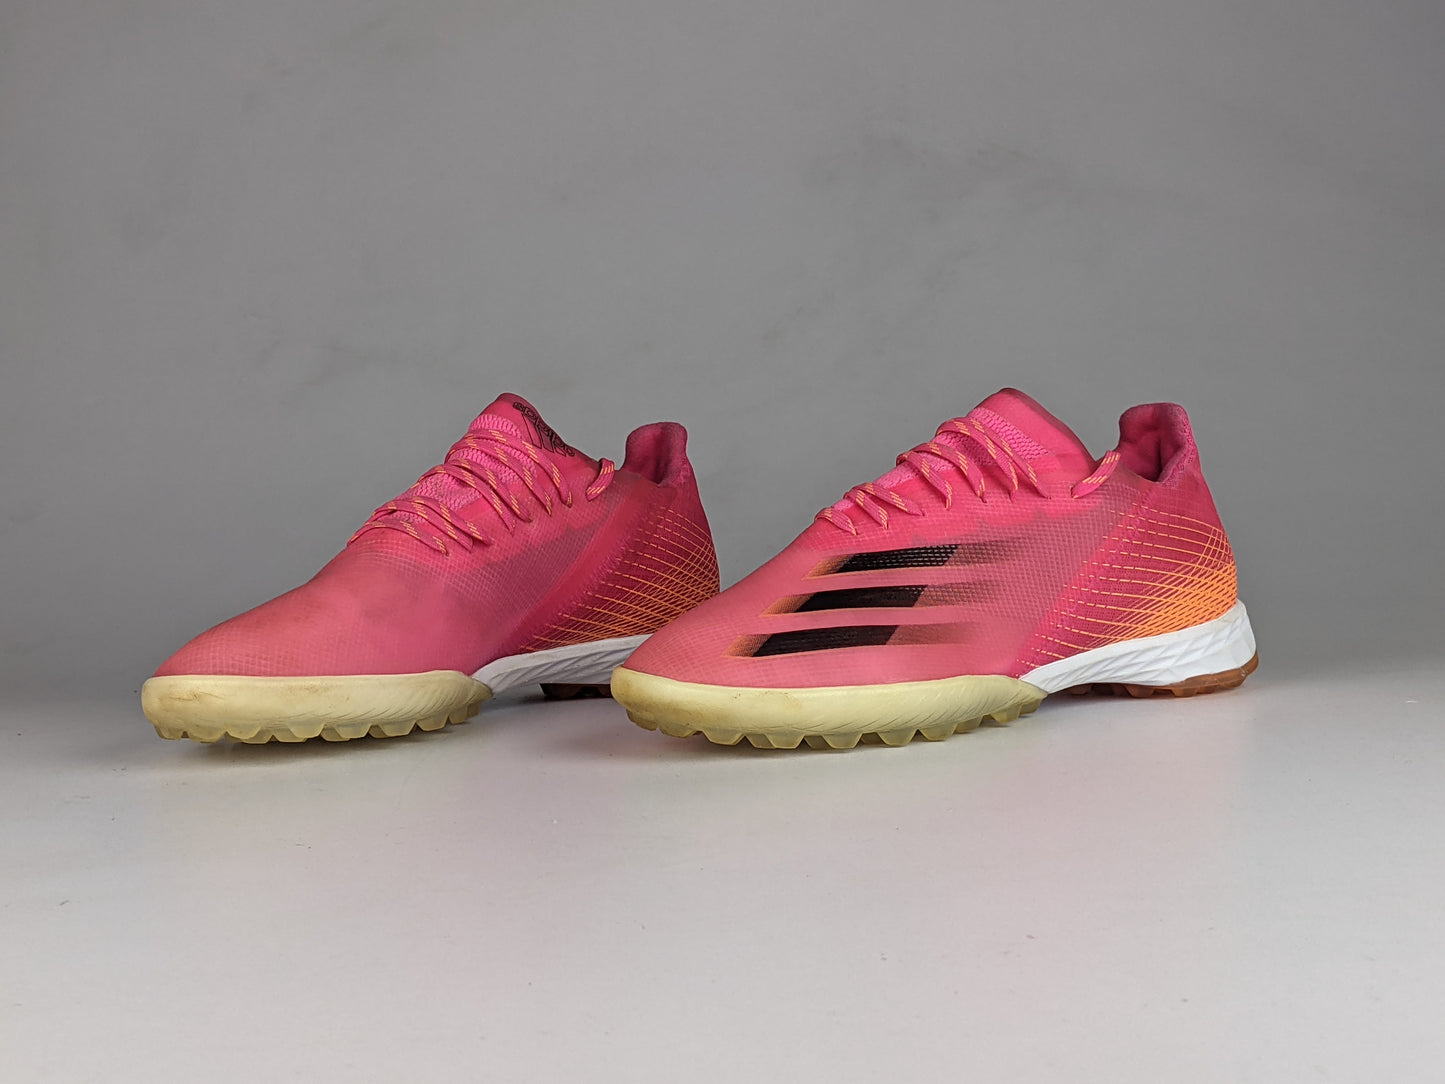 adidas X Ghosted.1 TF 'Shock Pink'